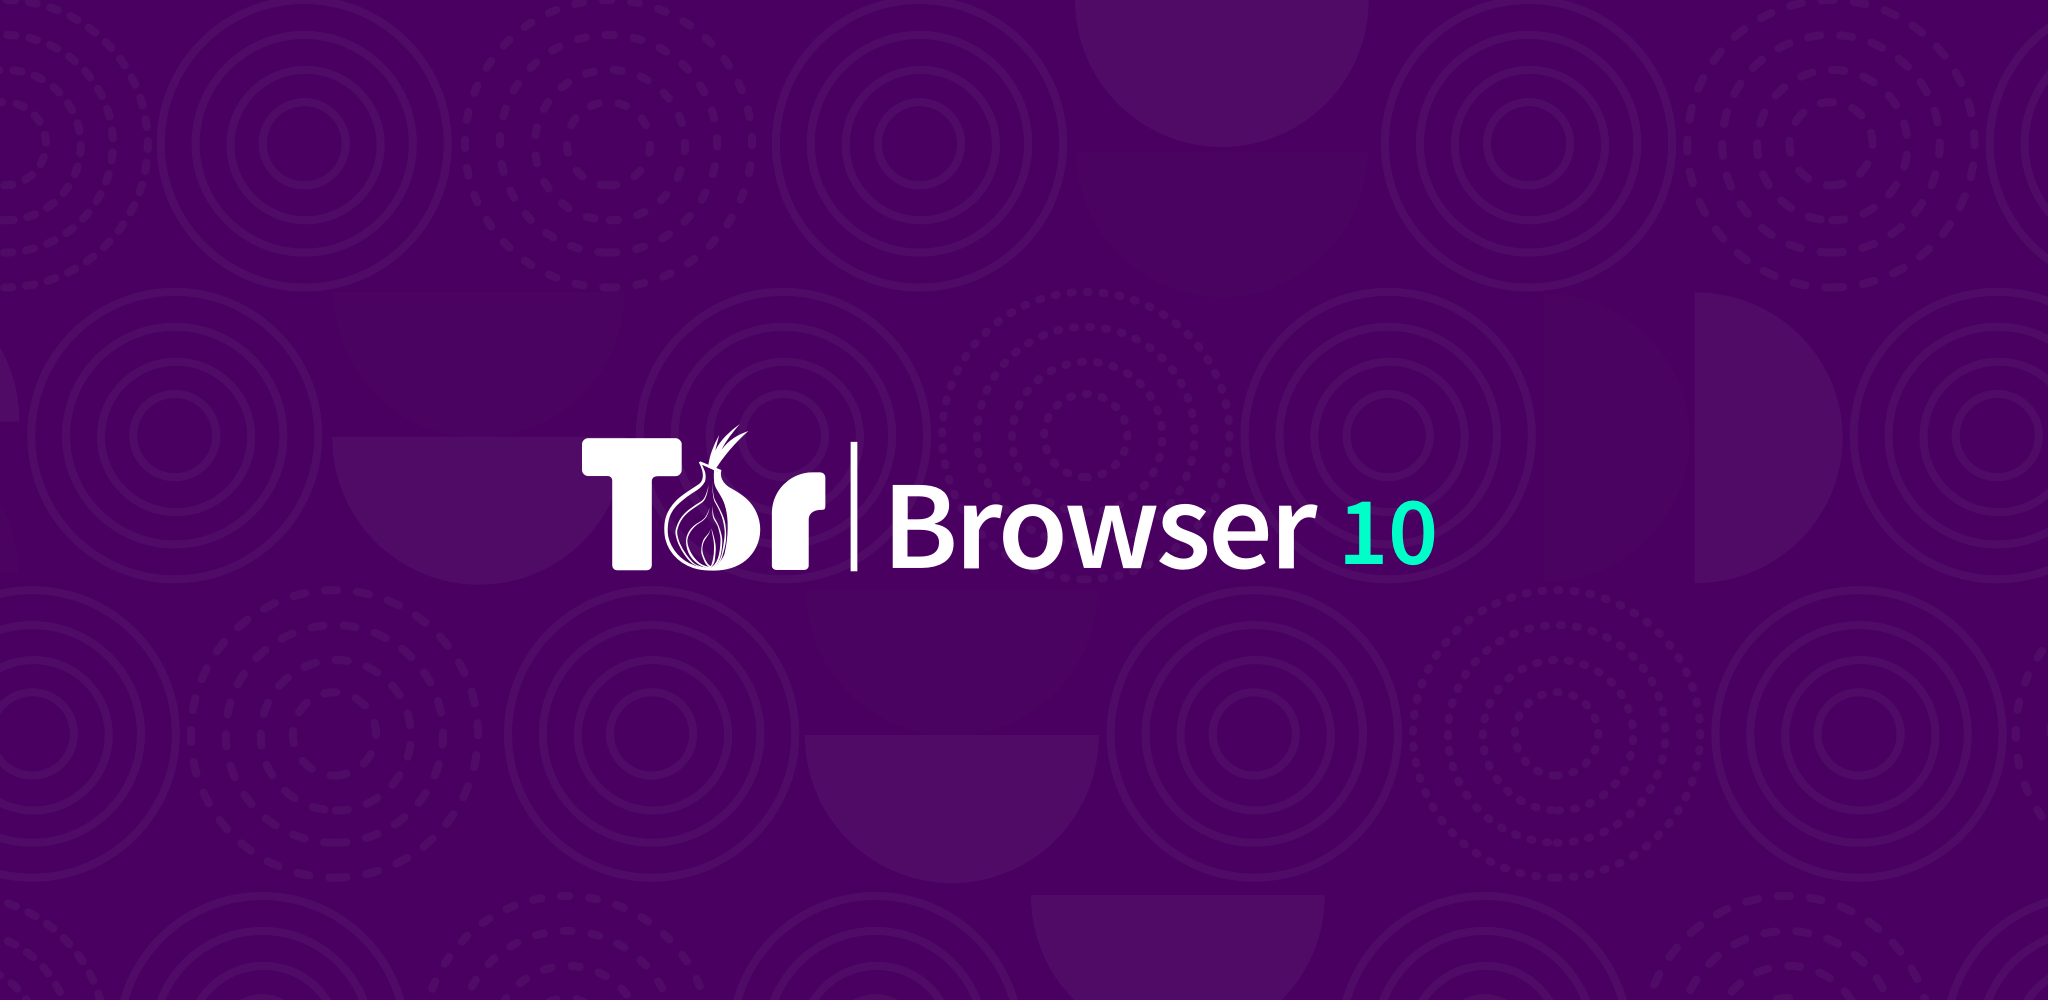 the tor browser for android gidra